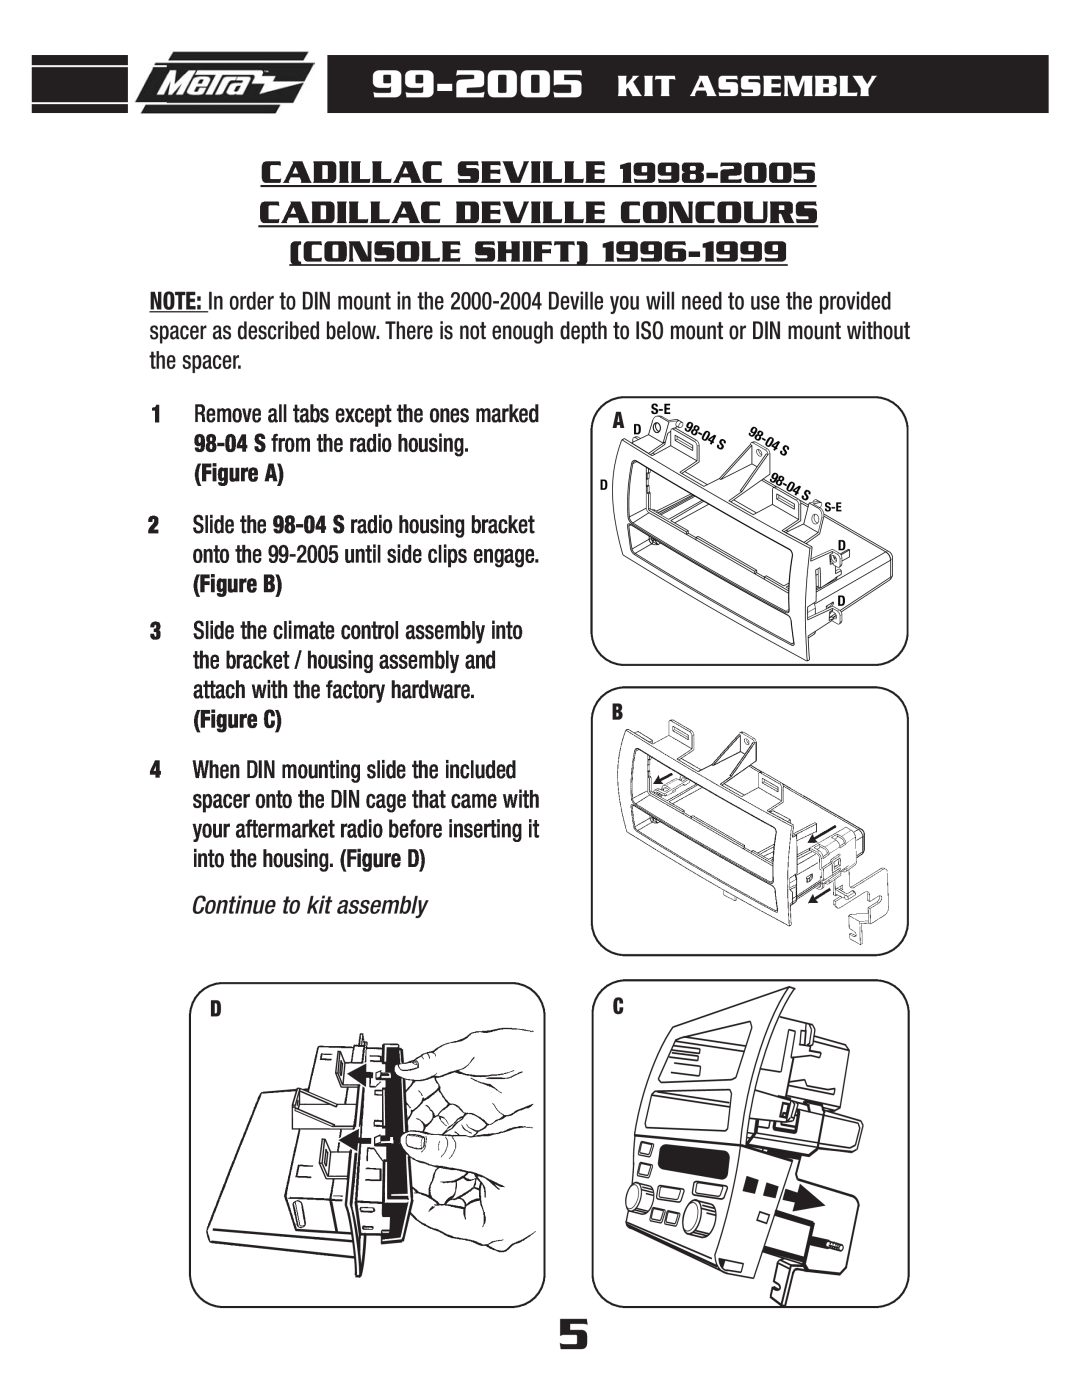 Metra Electronics 99-2005 installation instructions Cadillac Seville Cadillac Deville Concours, Console Shift, Kit Assembly 